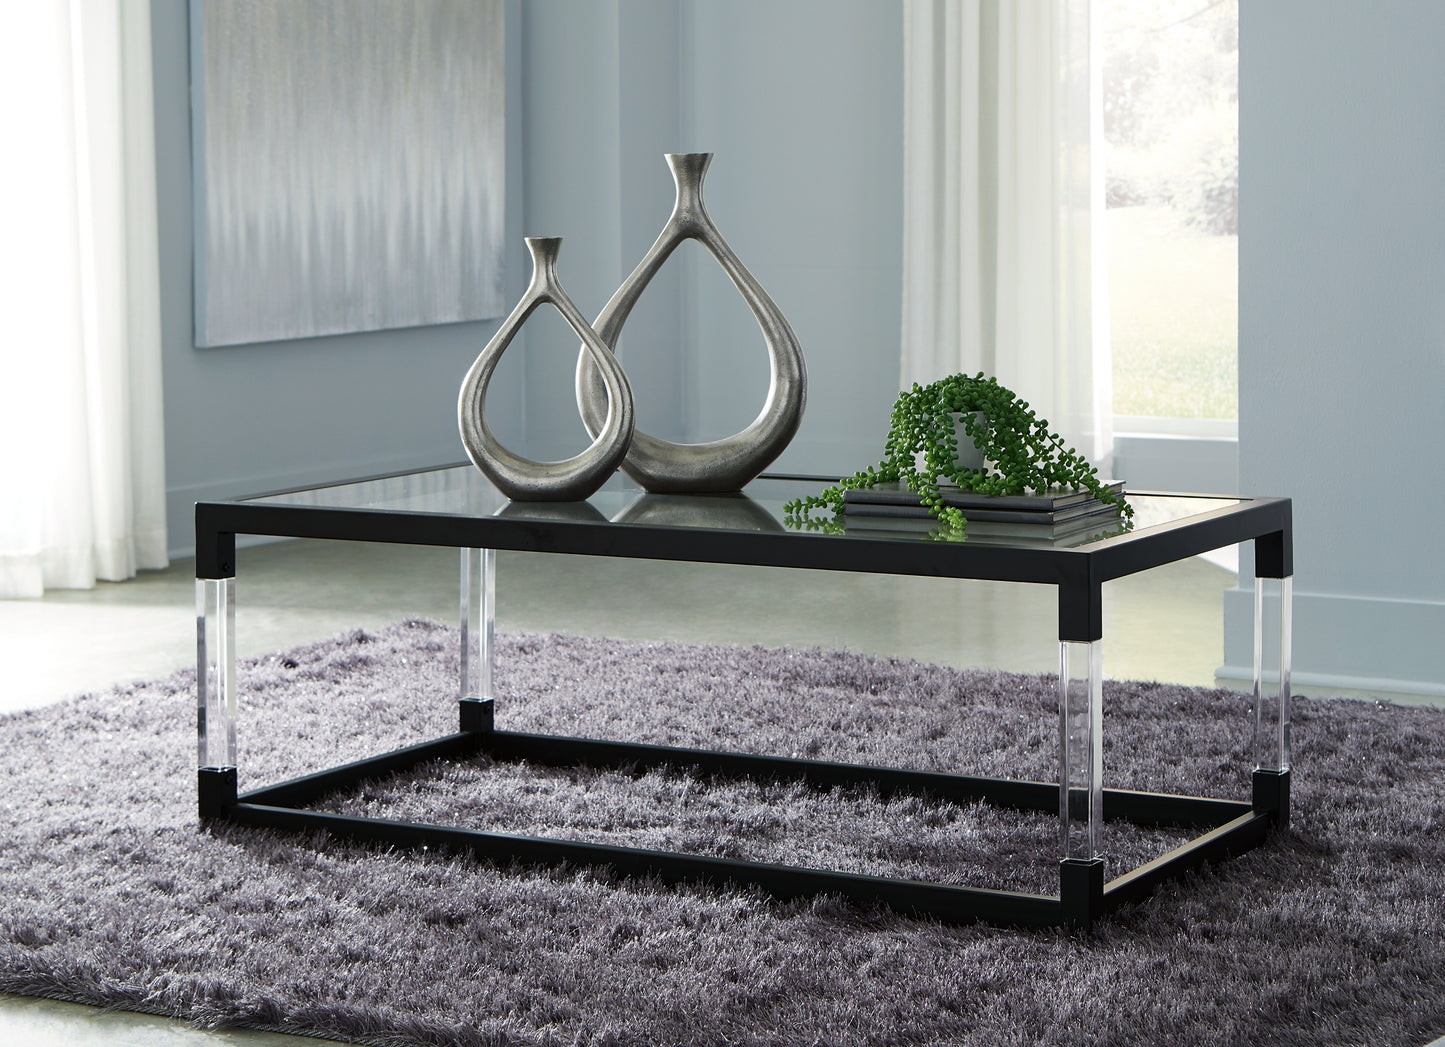 Nallynx Coffee Table with 1 End Table Wilson Furniture (OH)  in Bridgeport, Ohio. Serving Bridgeport, Yorkville, Bellaire, & Avondale